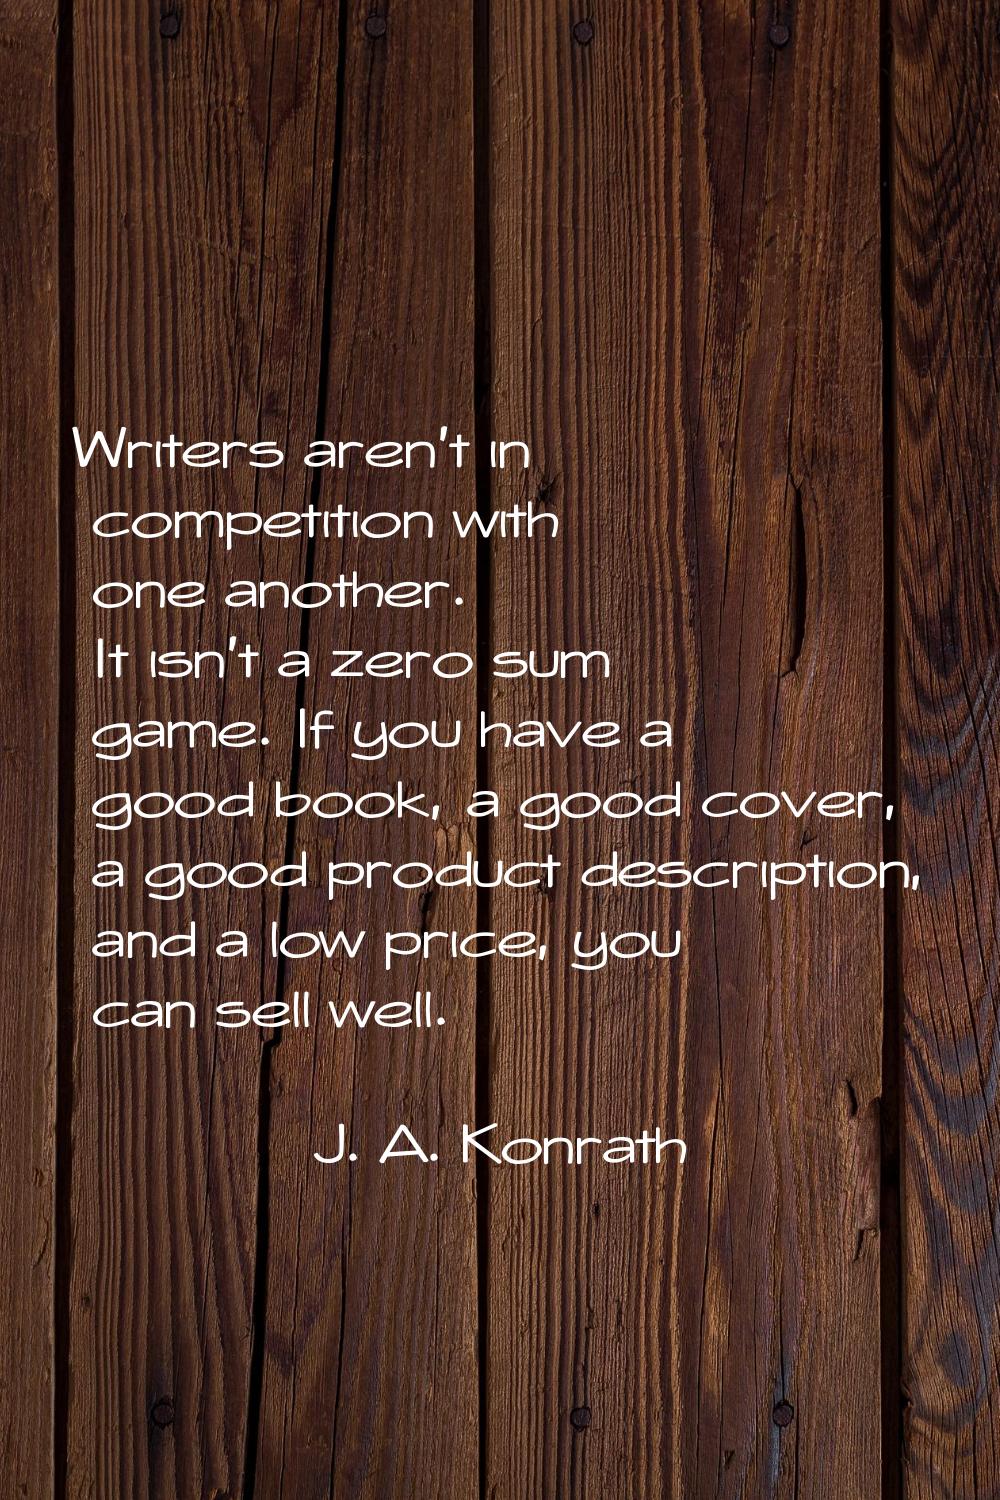 Writers aren't in competition with one another. It isn't a zero sum game. If you have a good book, 